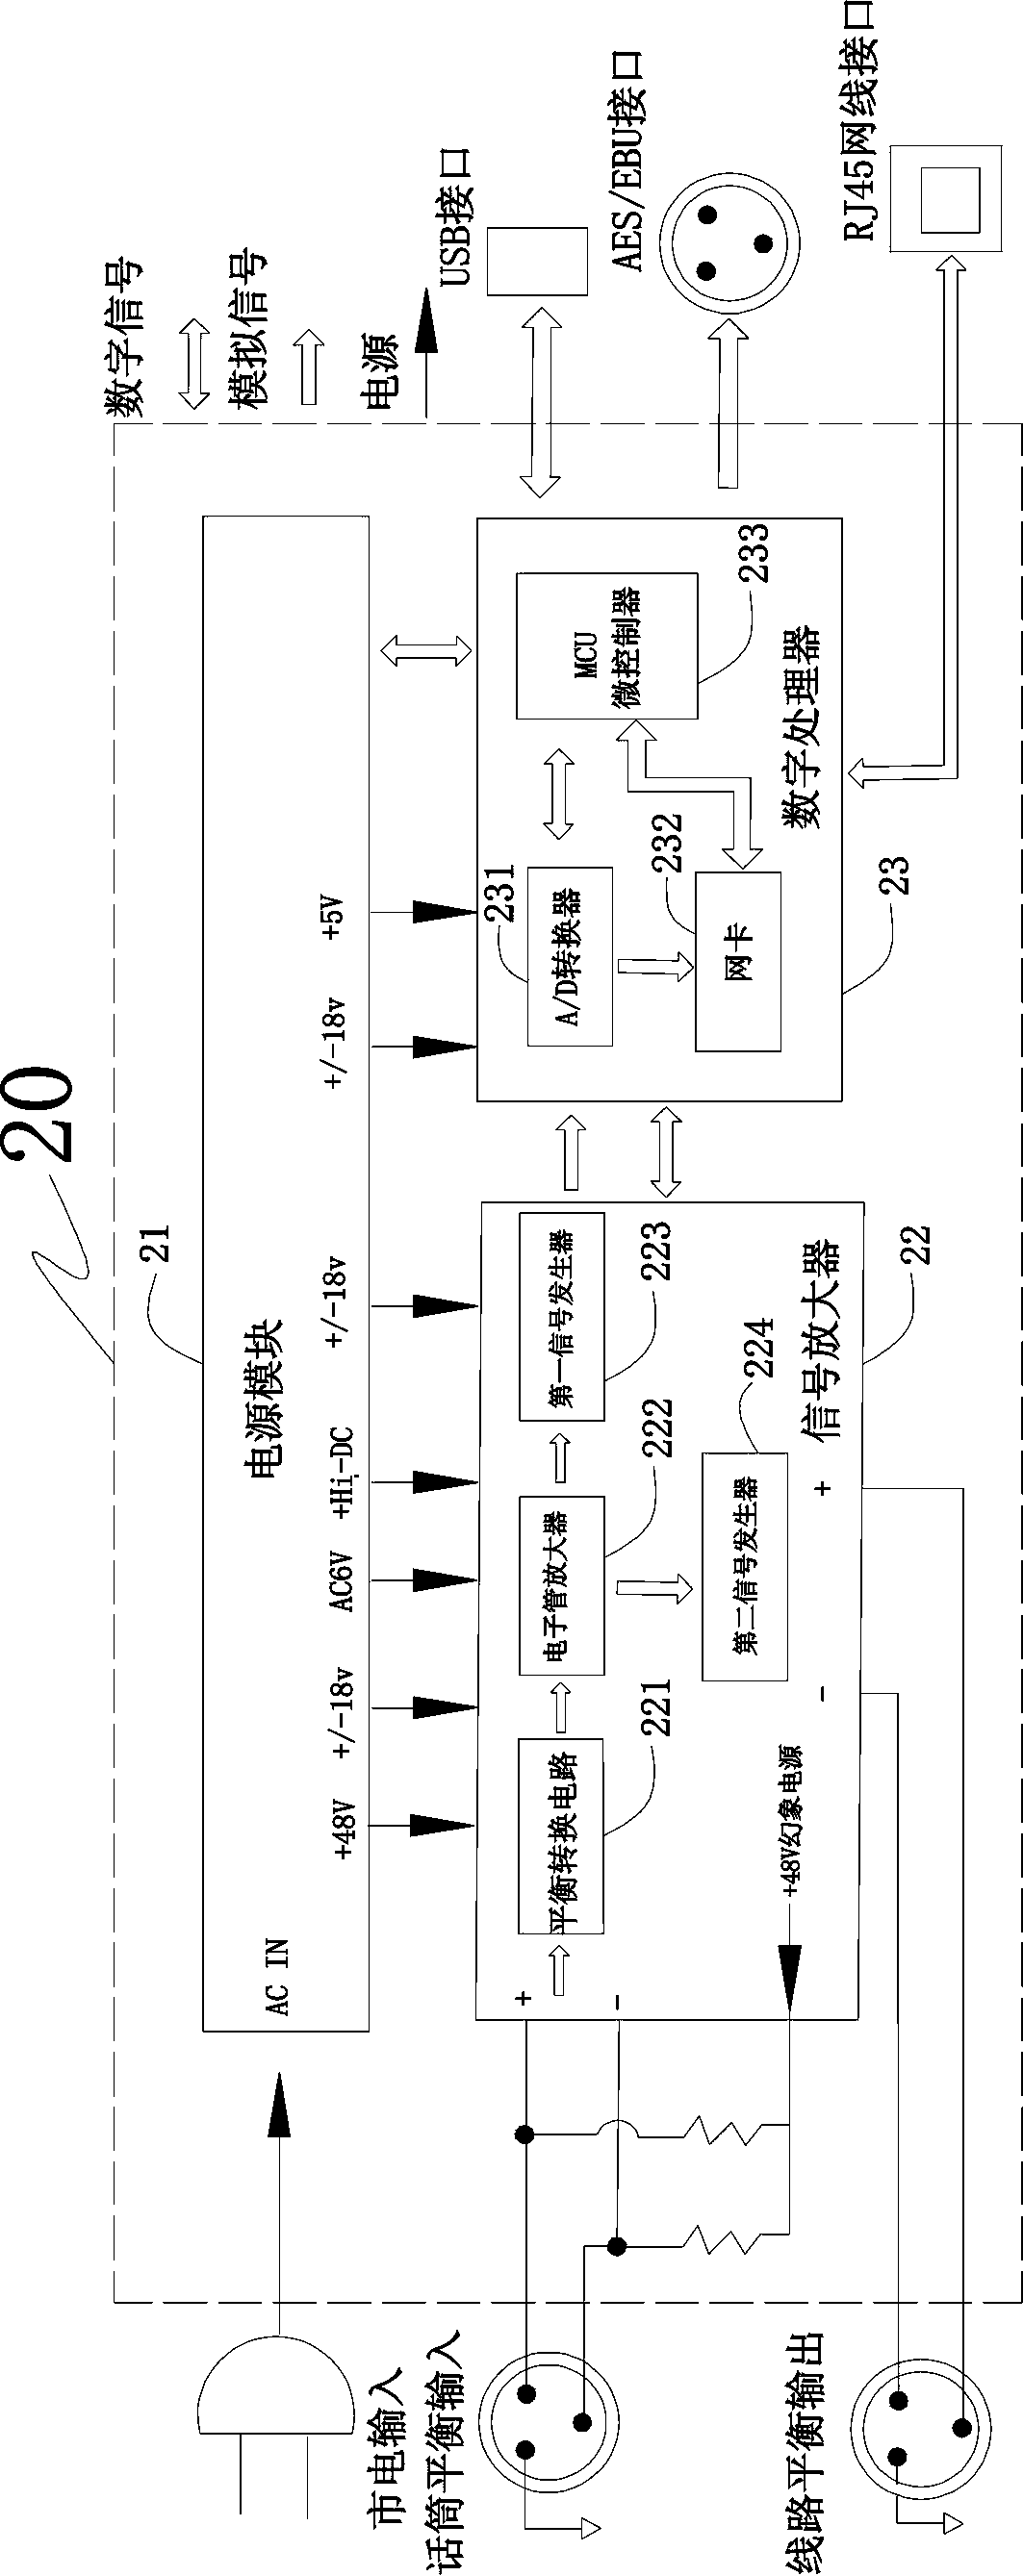 Shared recording control system and realization method